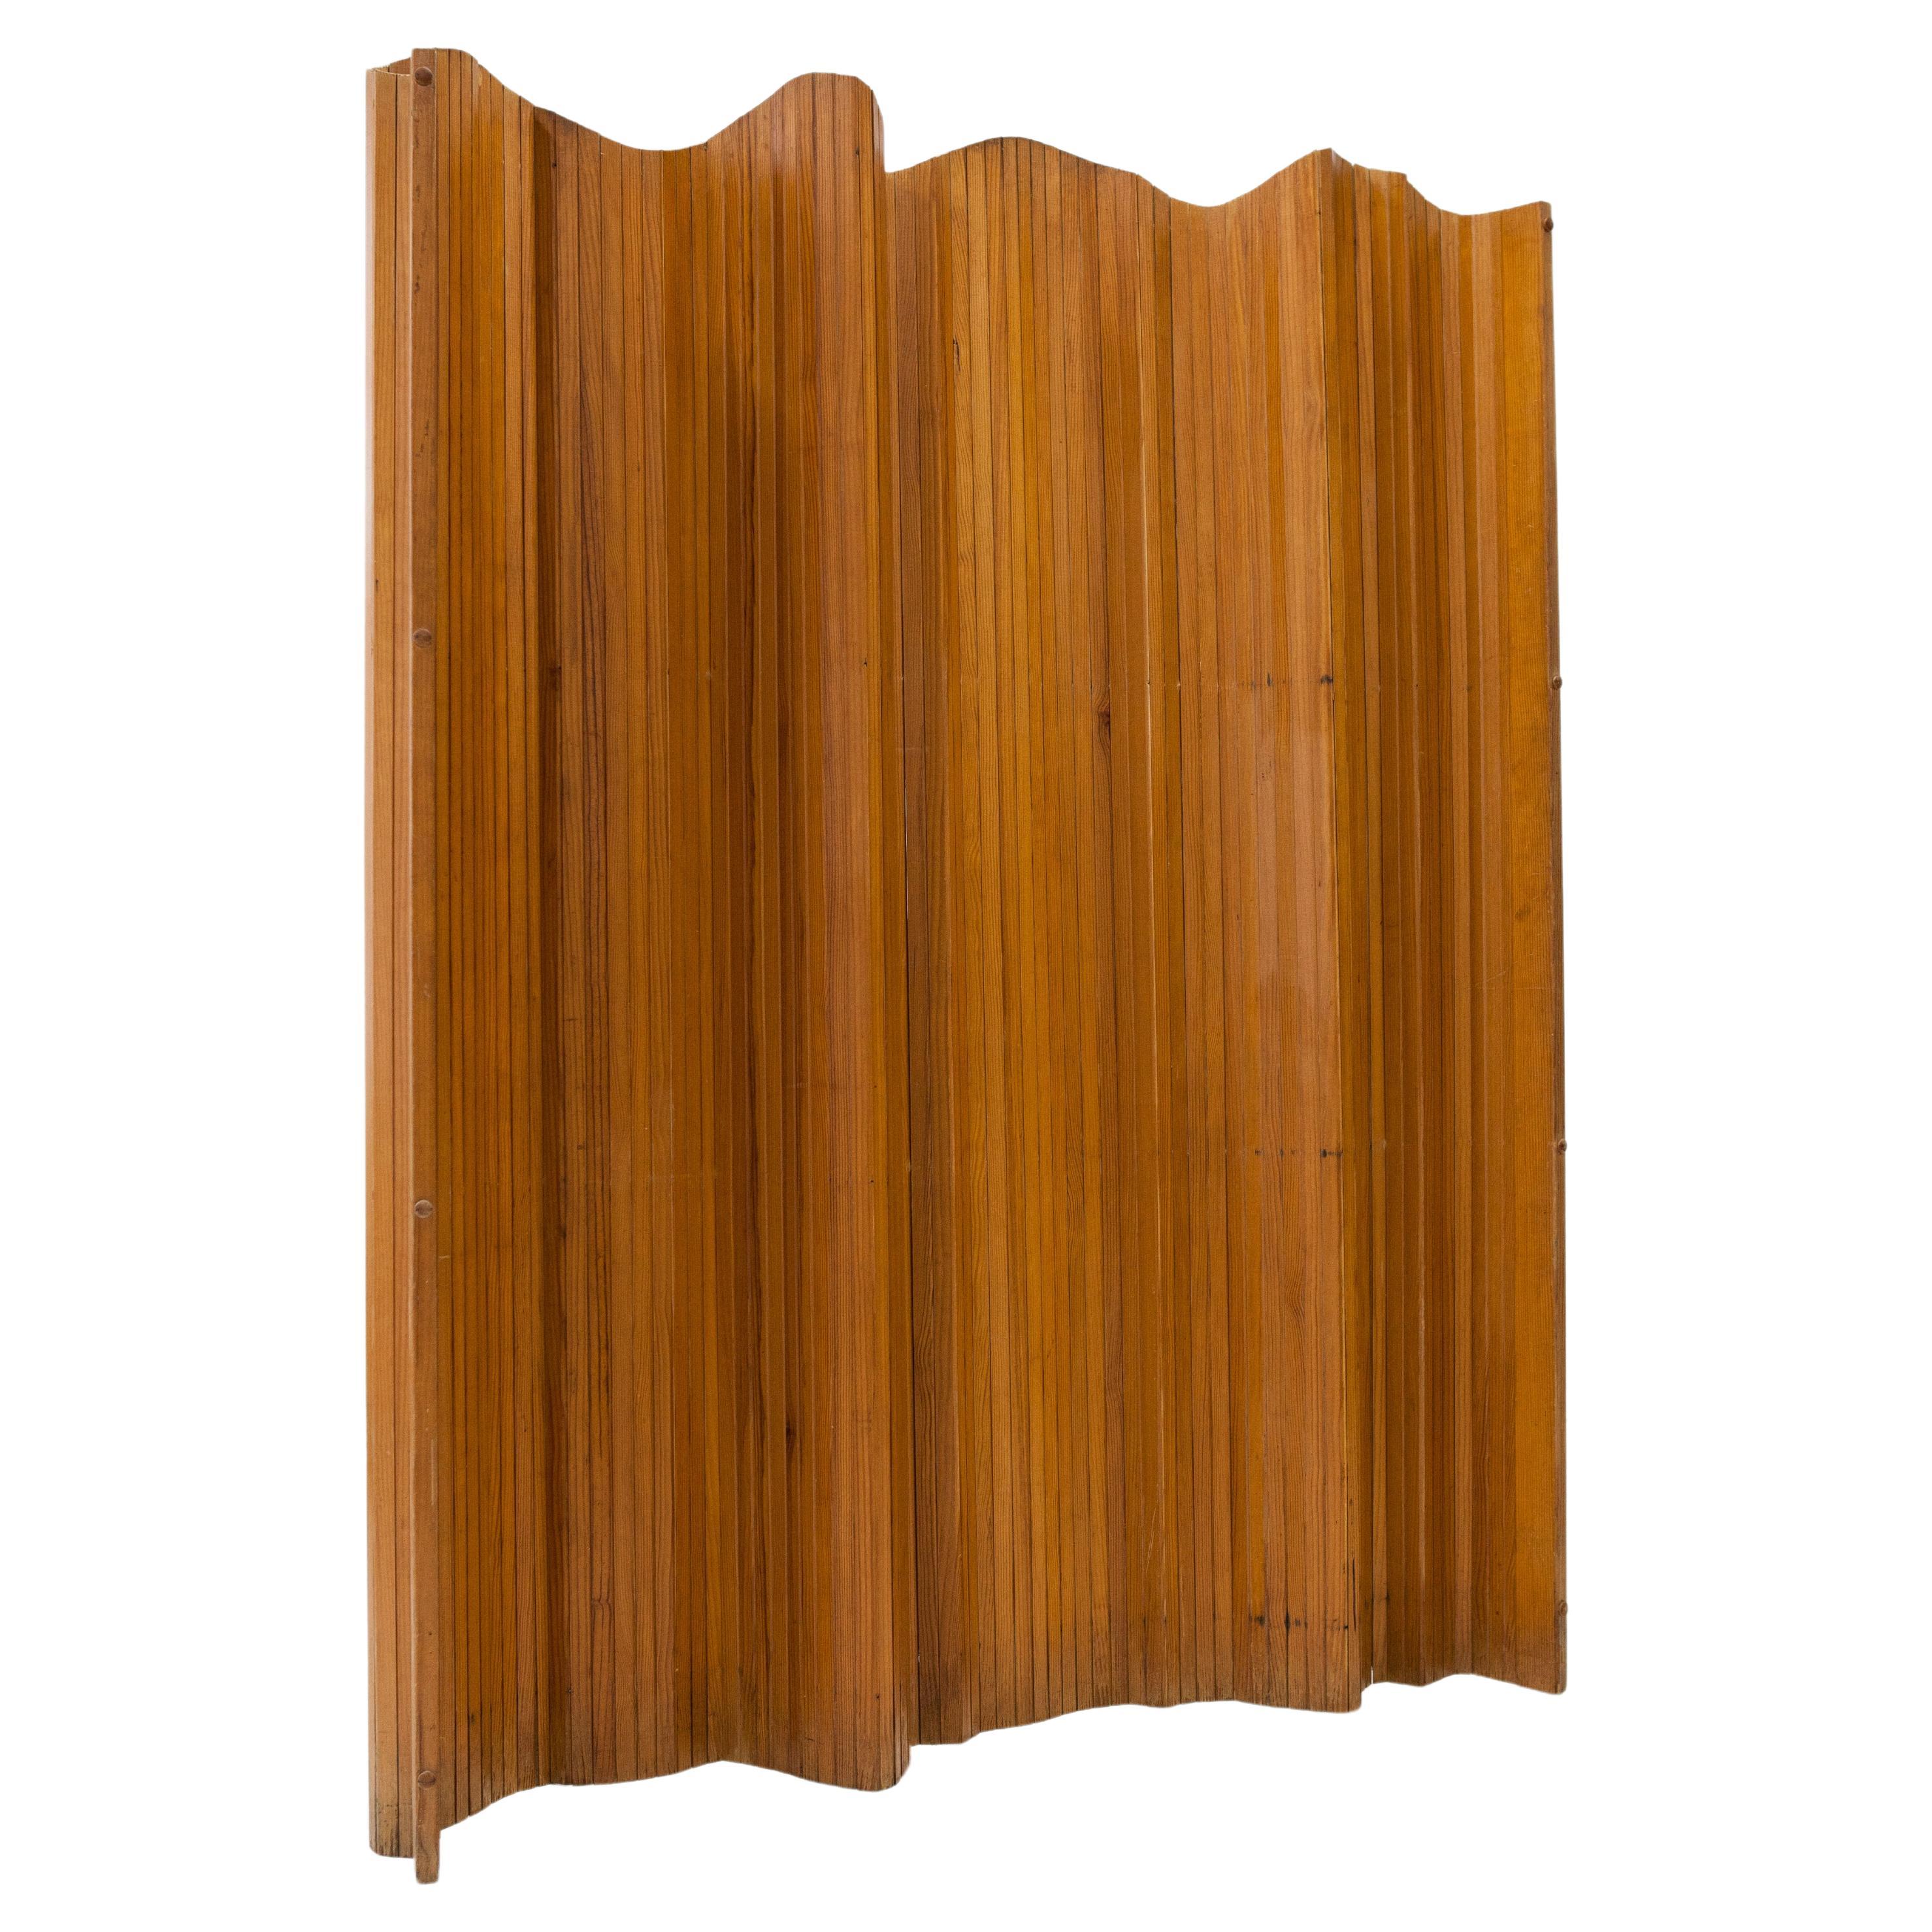 French wooden room divider, Tambour Screen by Jomain Baumann, 1950s